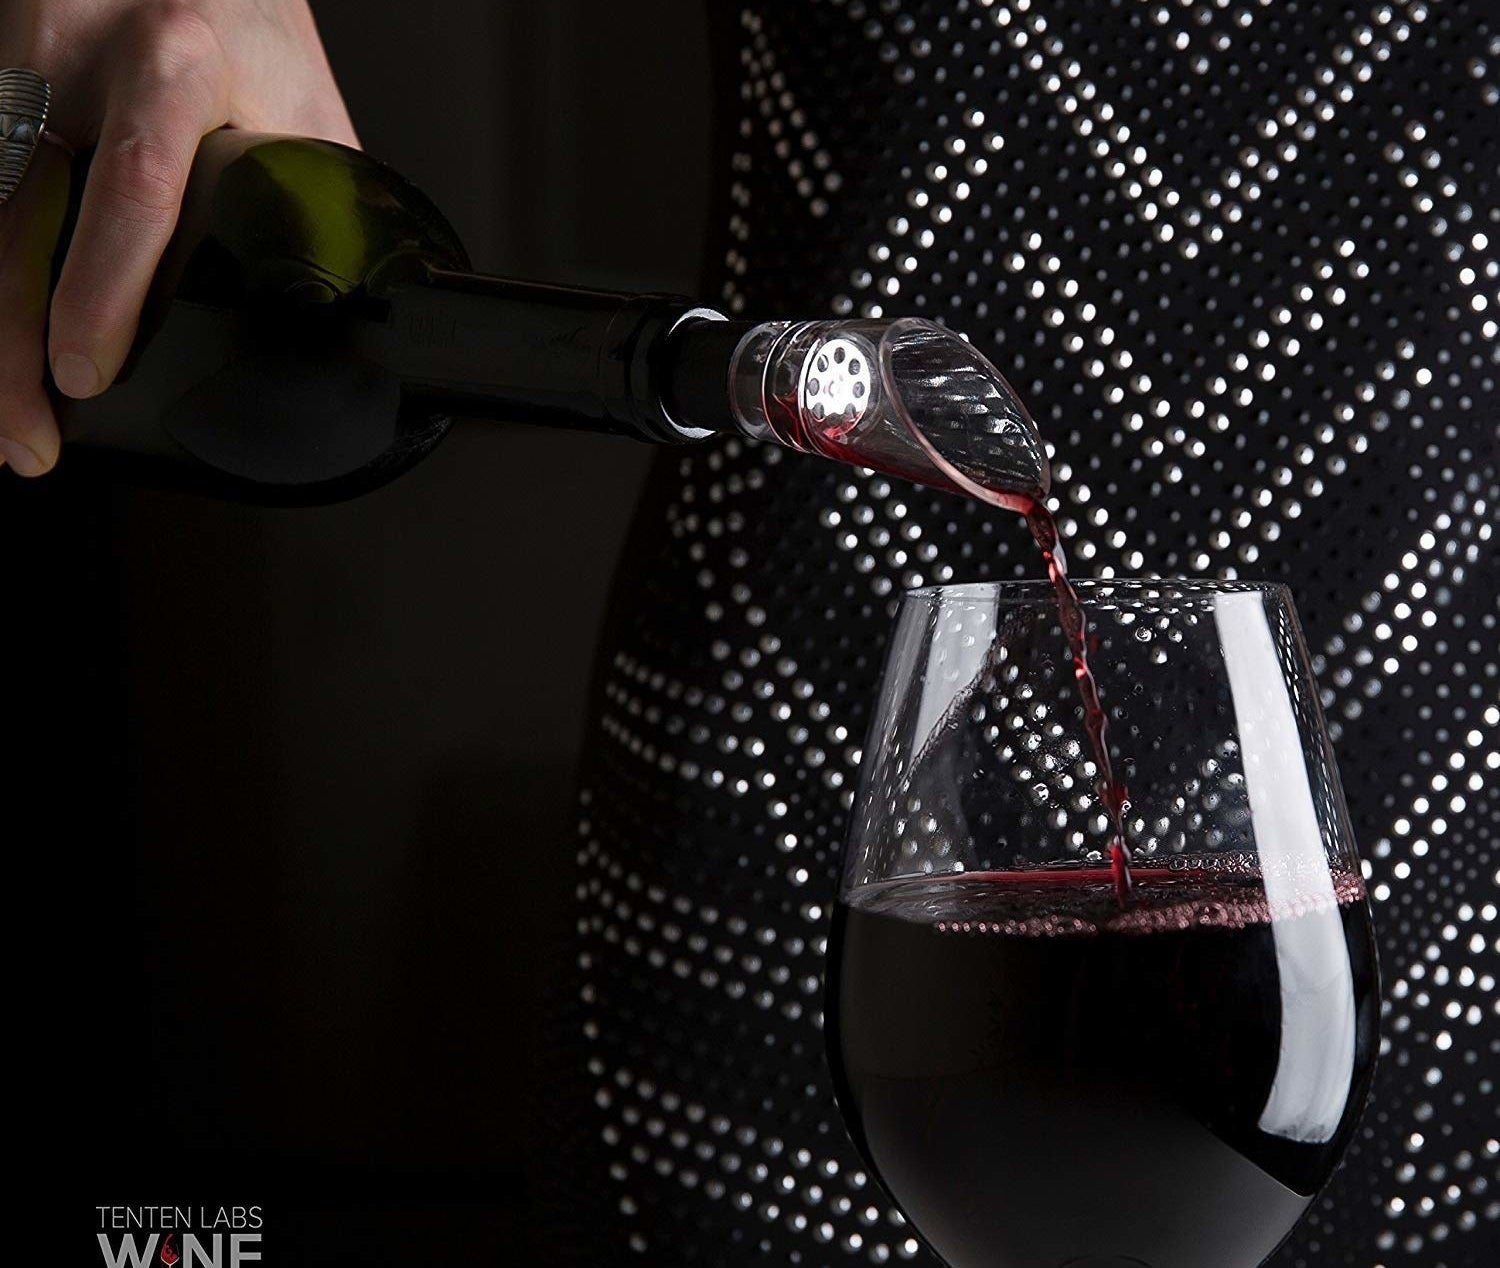 Someone pouring wine using the decanter